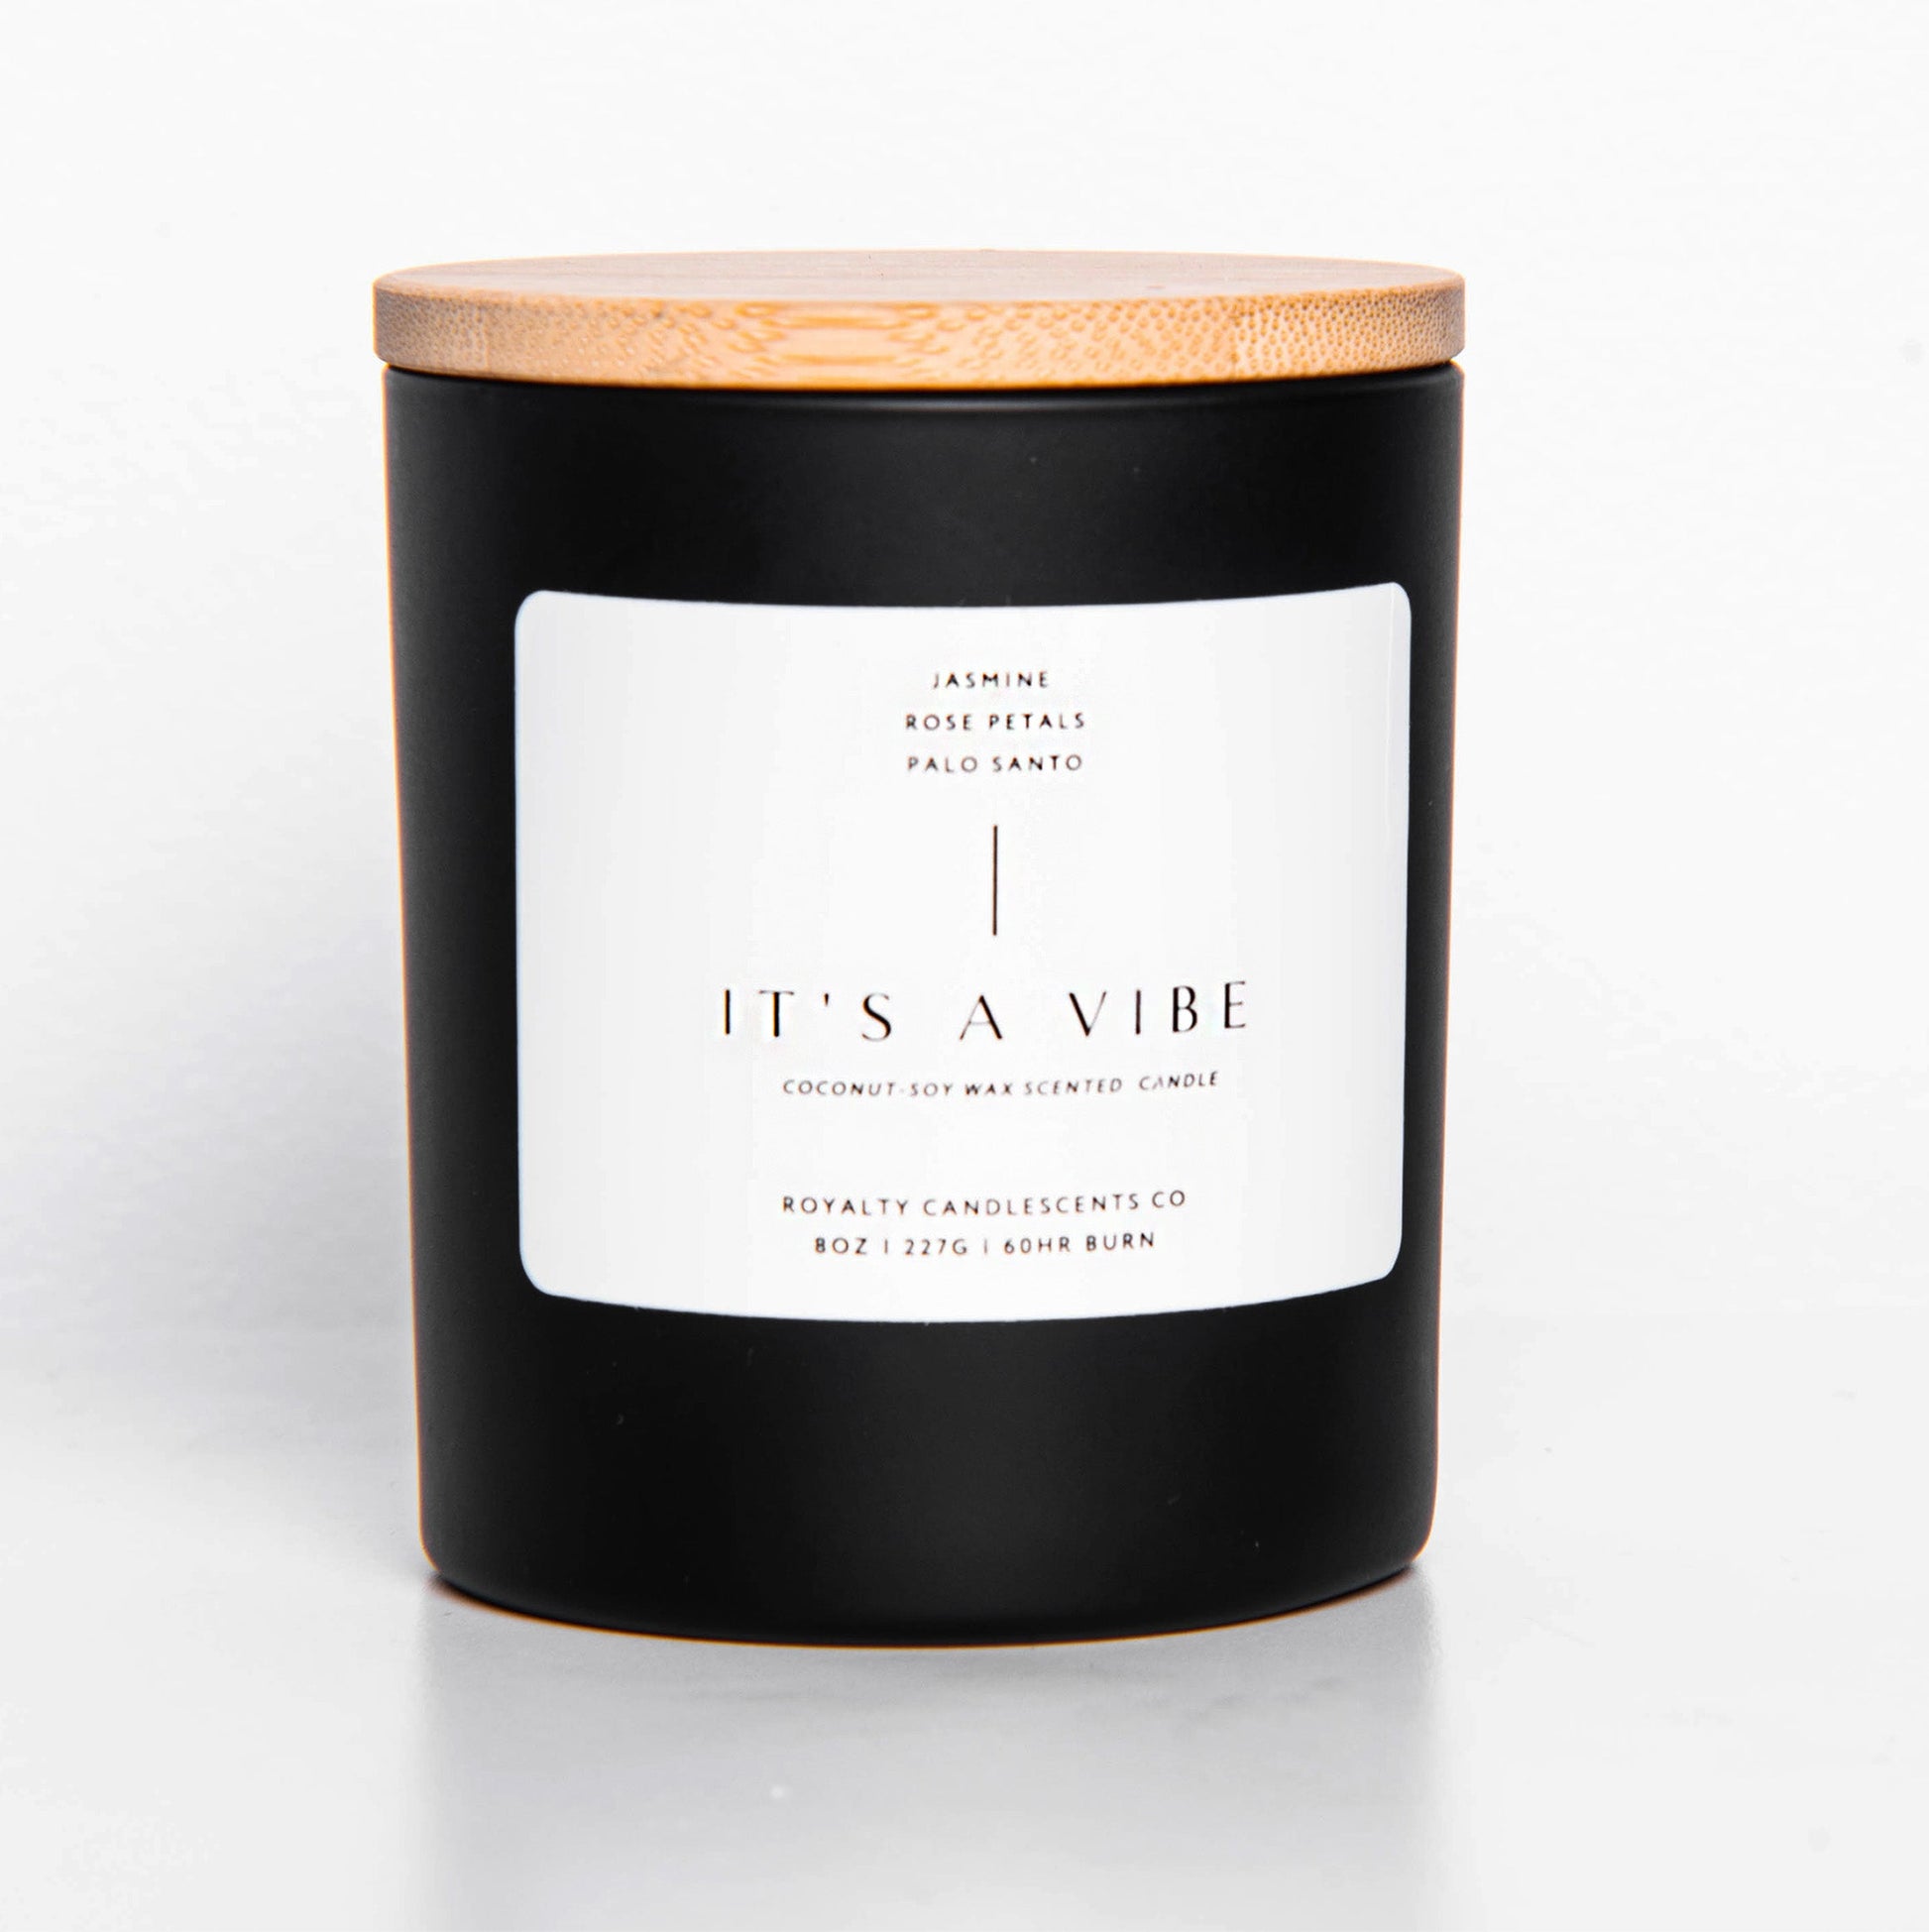 Black candle jar with wooden lid, with white label saying "It's A Vibe" in plain lettering.